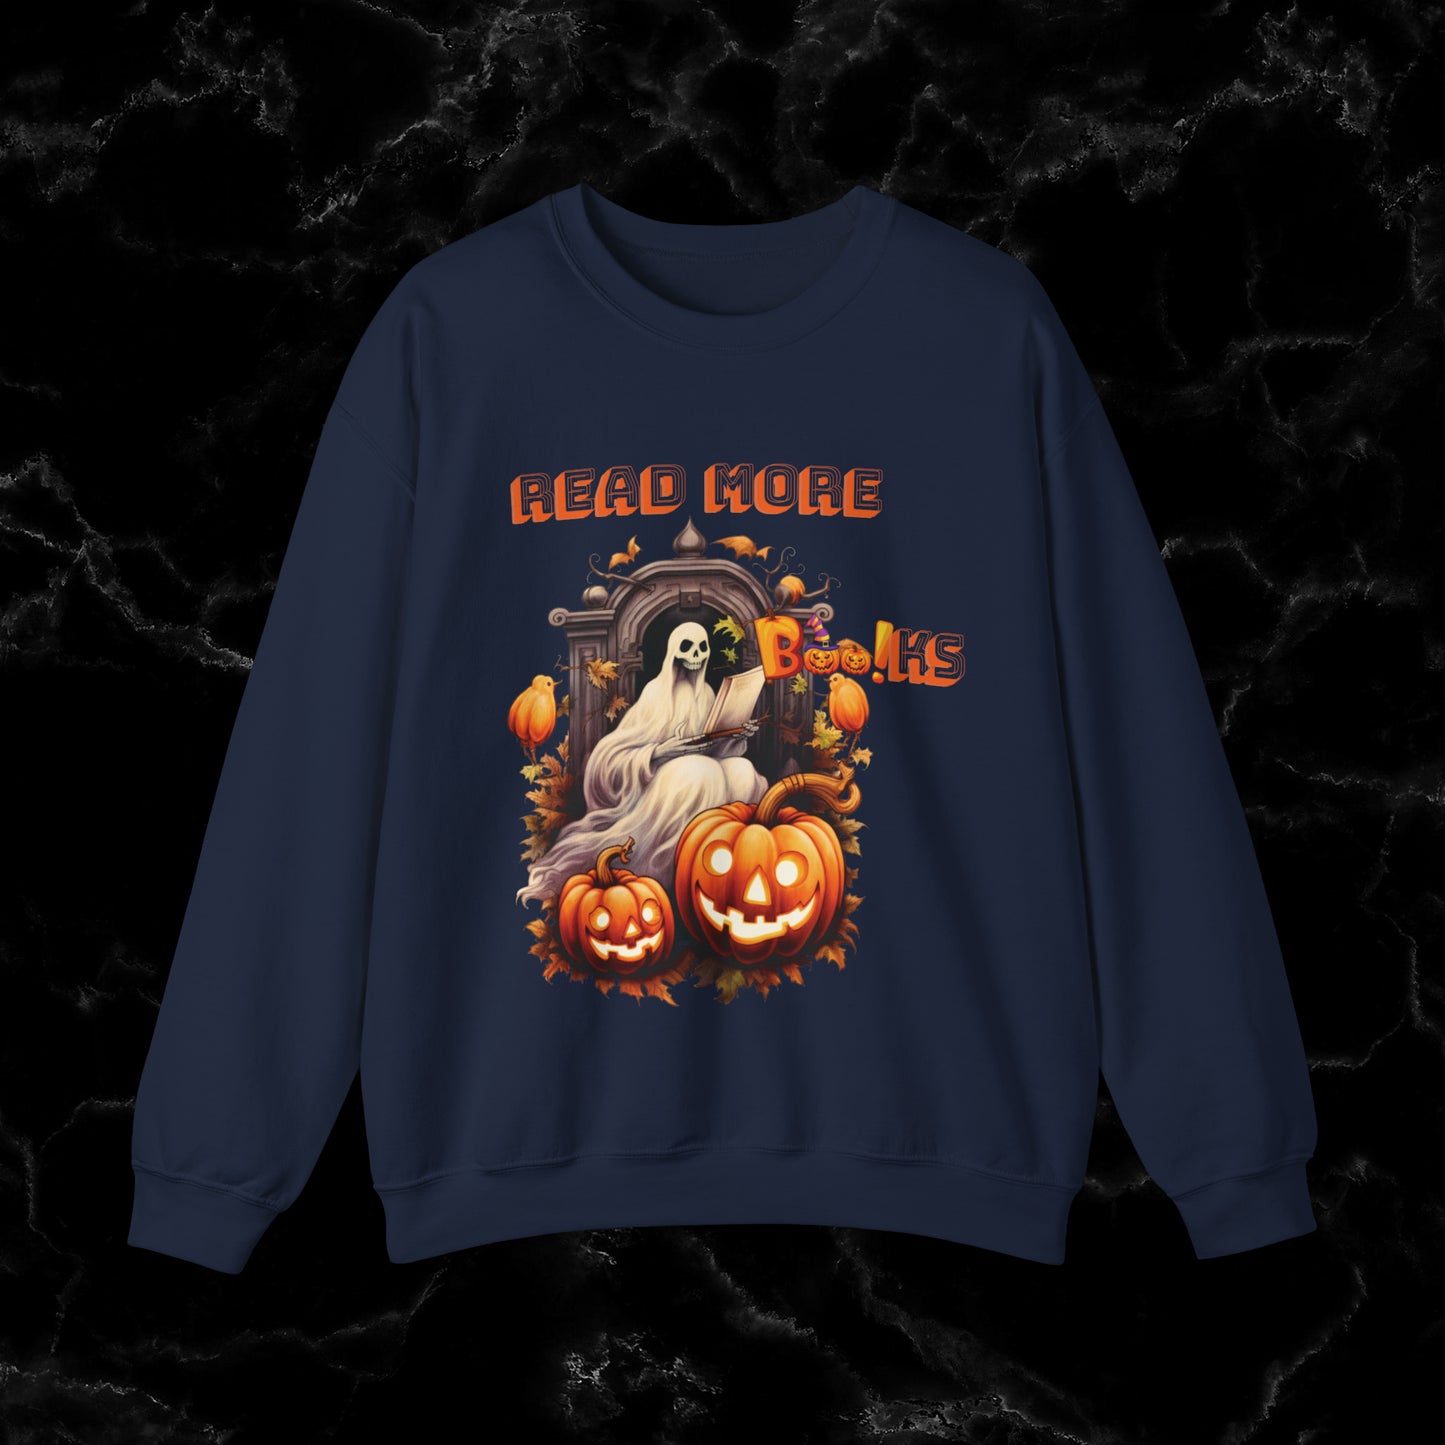 Read More Books Sweatshirt - Book Lover Halloween Sweater for Librarians and Students Sweatshirt S Navy 